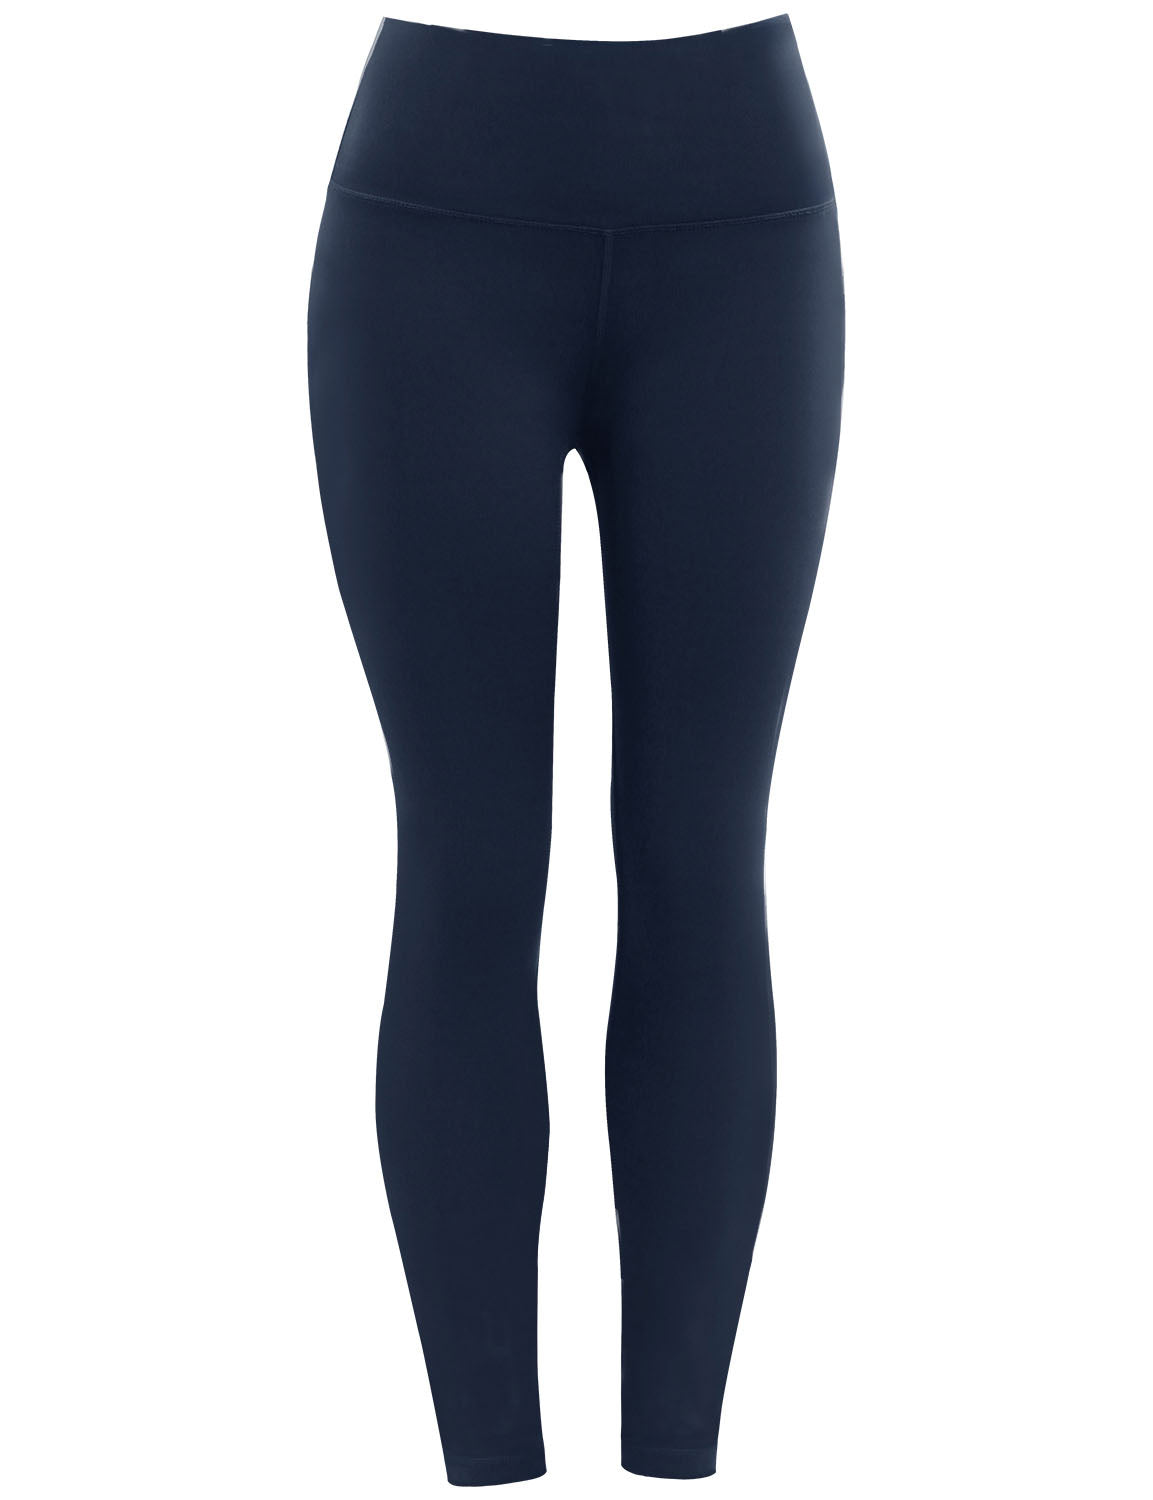 High Waist Yoga Pants darknavy 75%Nylon/25%Spandex Fabric doesn't attract lint easily 4-way stretch No see-through Moisture-wicking Tummy control Inner pocket Four lengths